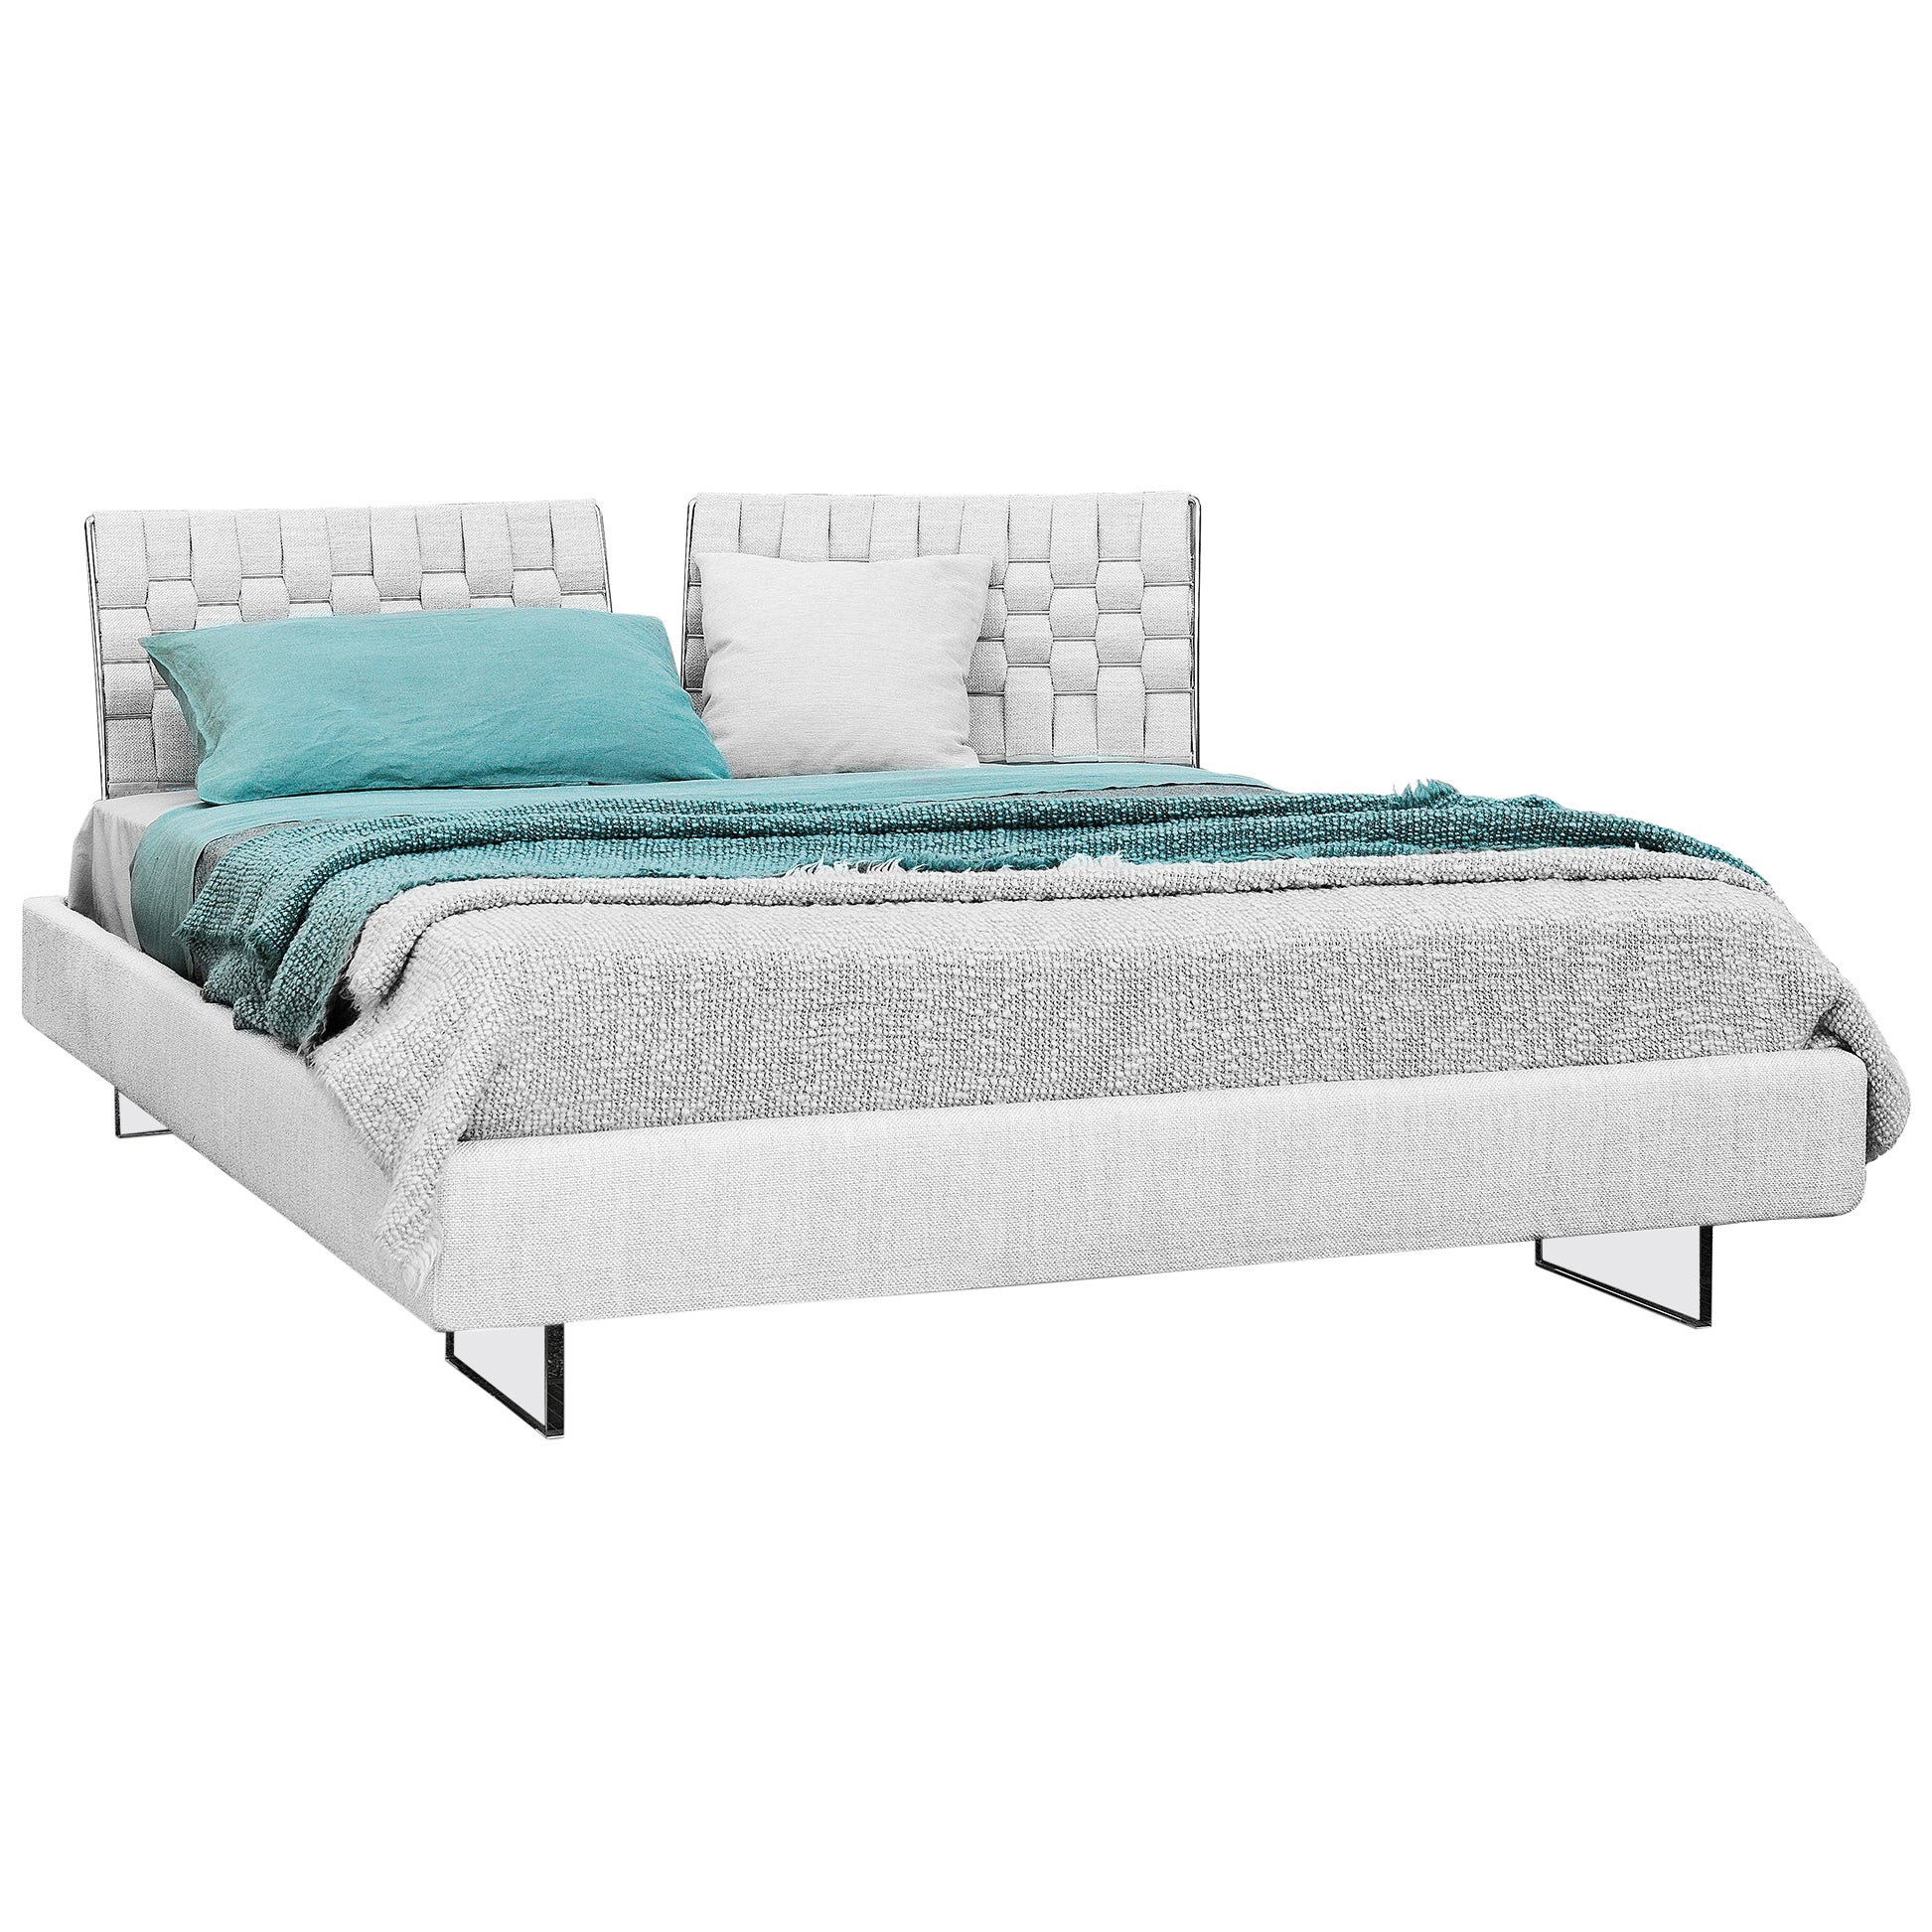 Letto Limes Large Bed in White Avant Après with Padded Bands Headboard For Sale